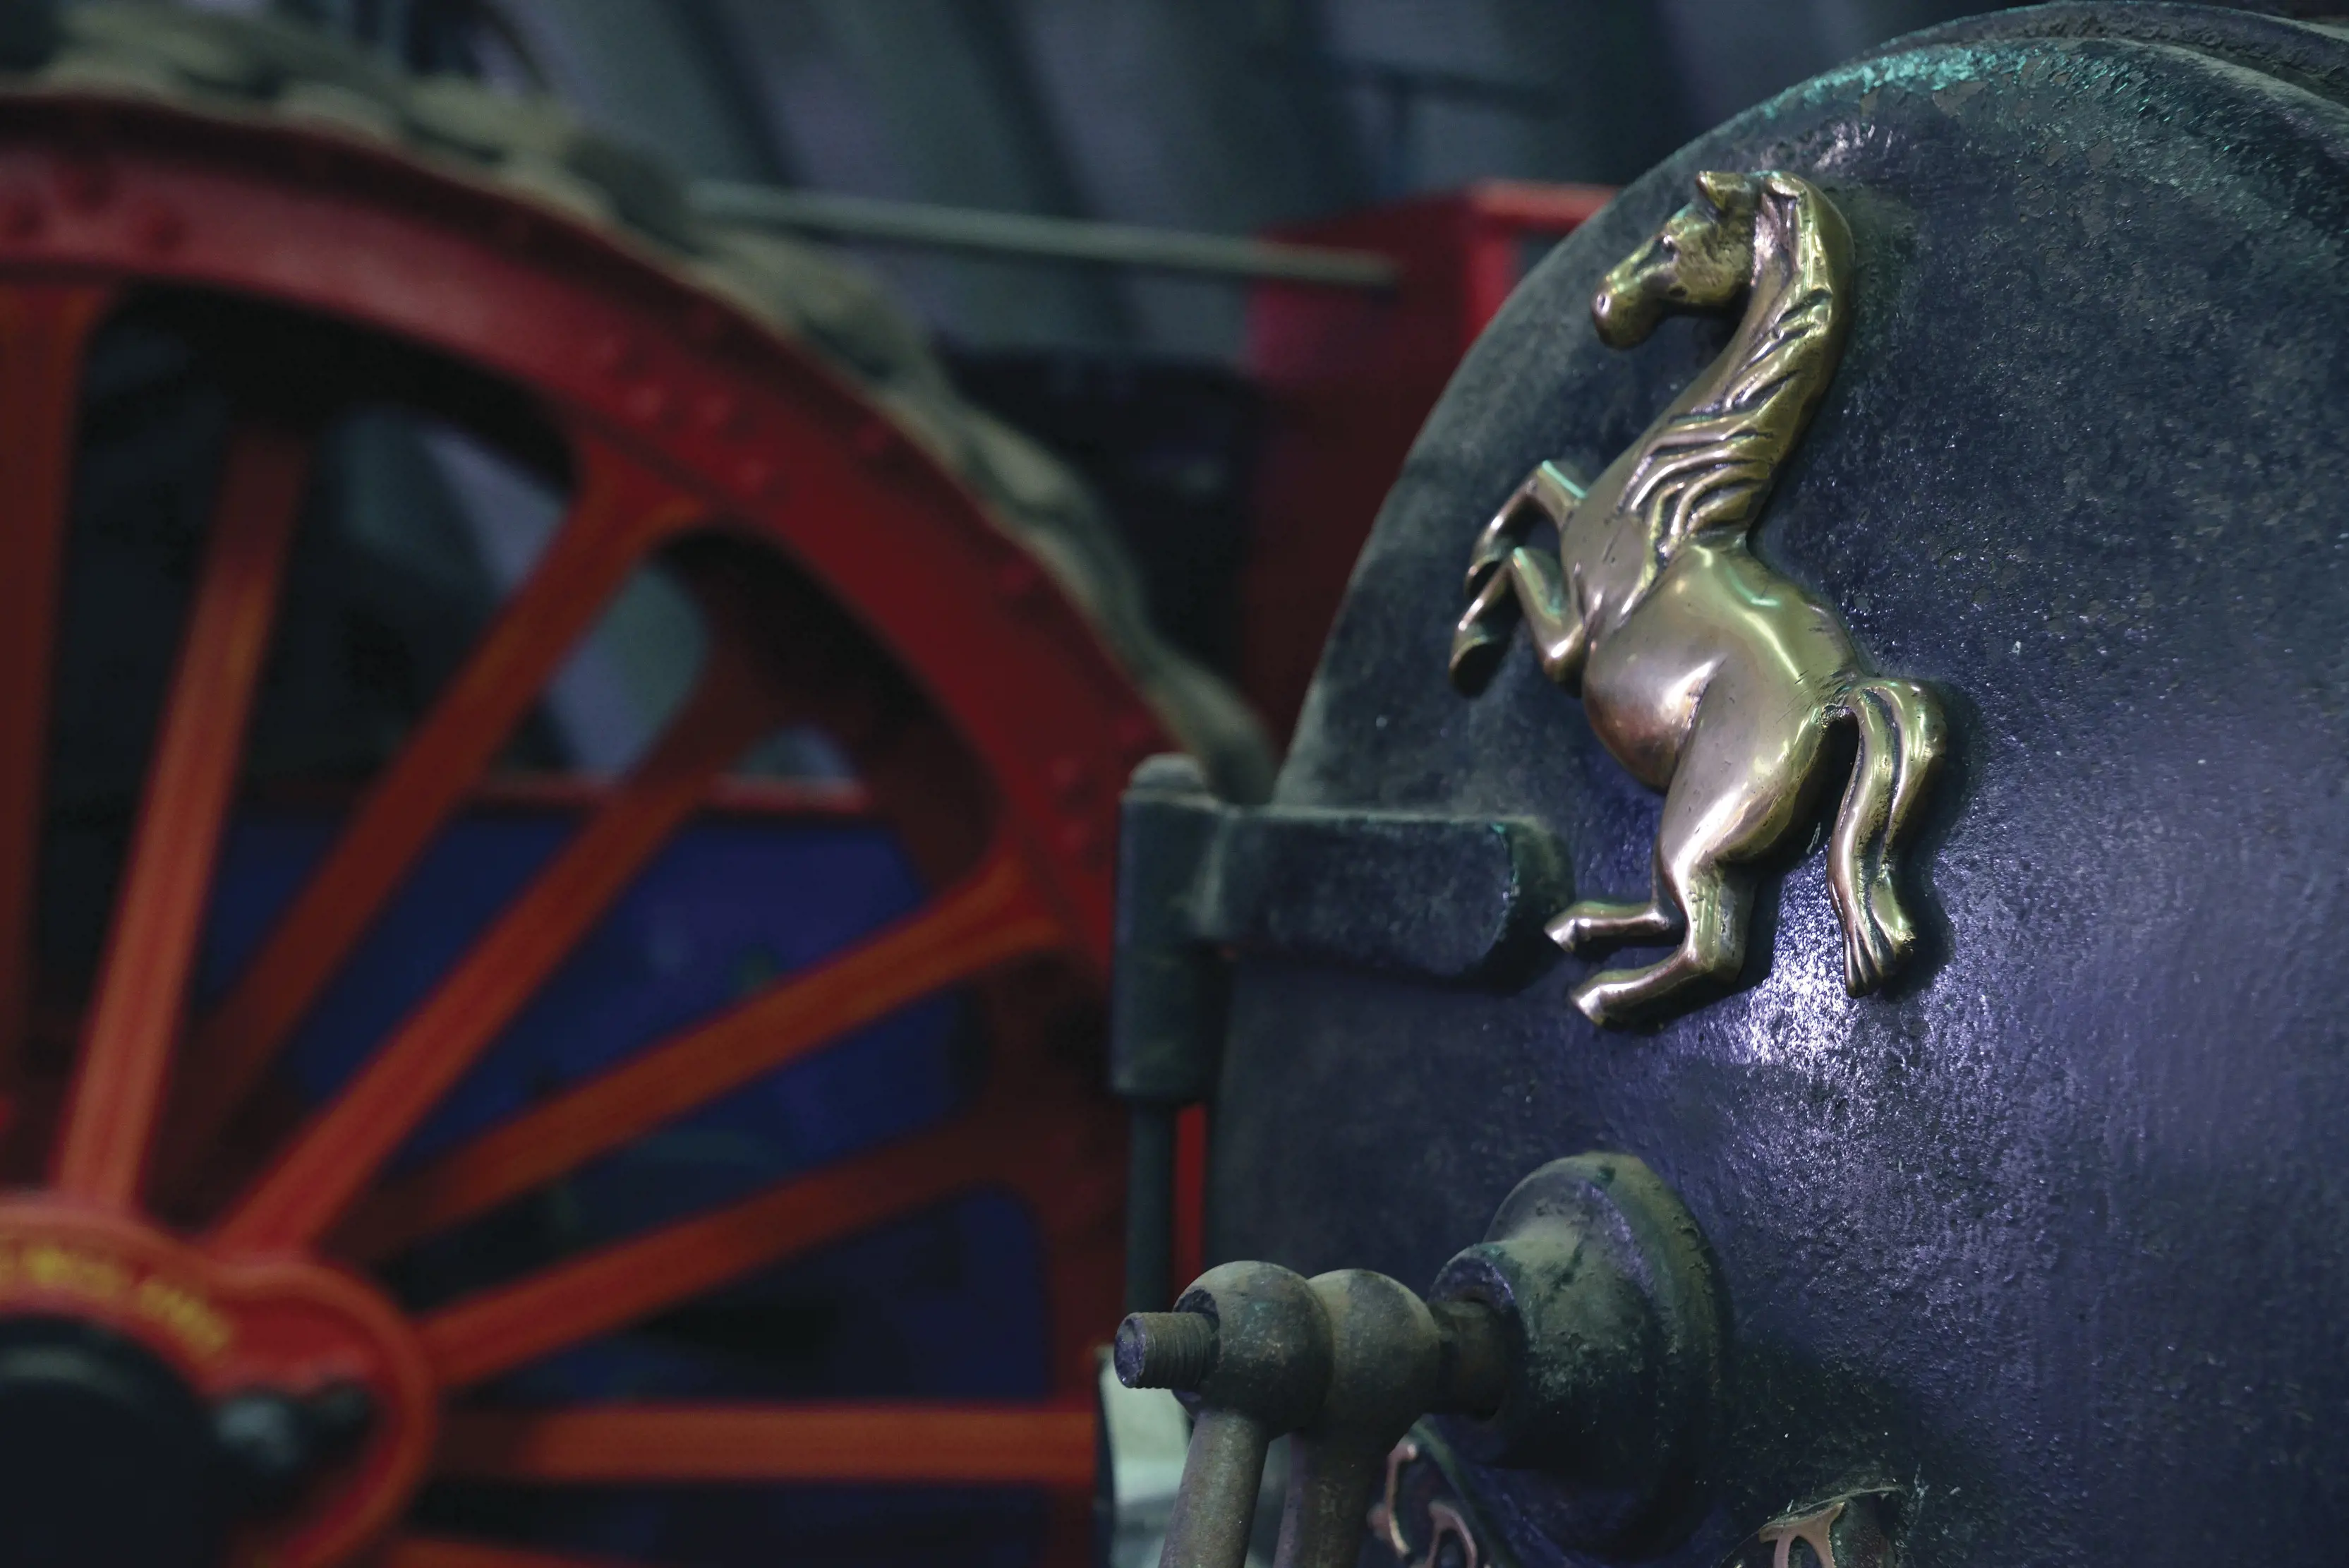 Horse ornament on mechanical device at Pearns Steam World